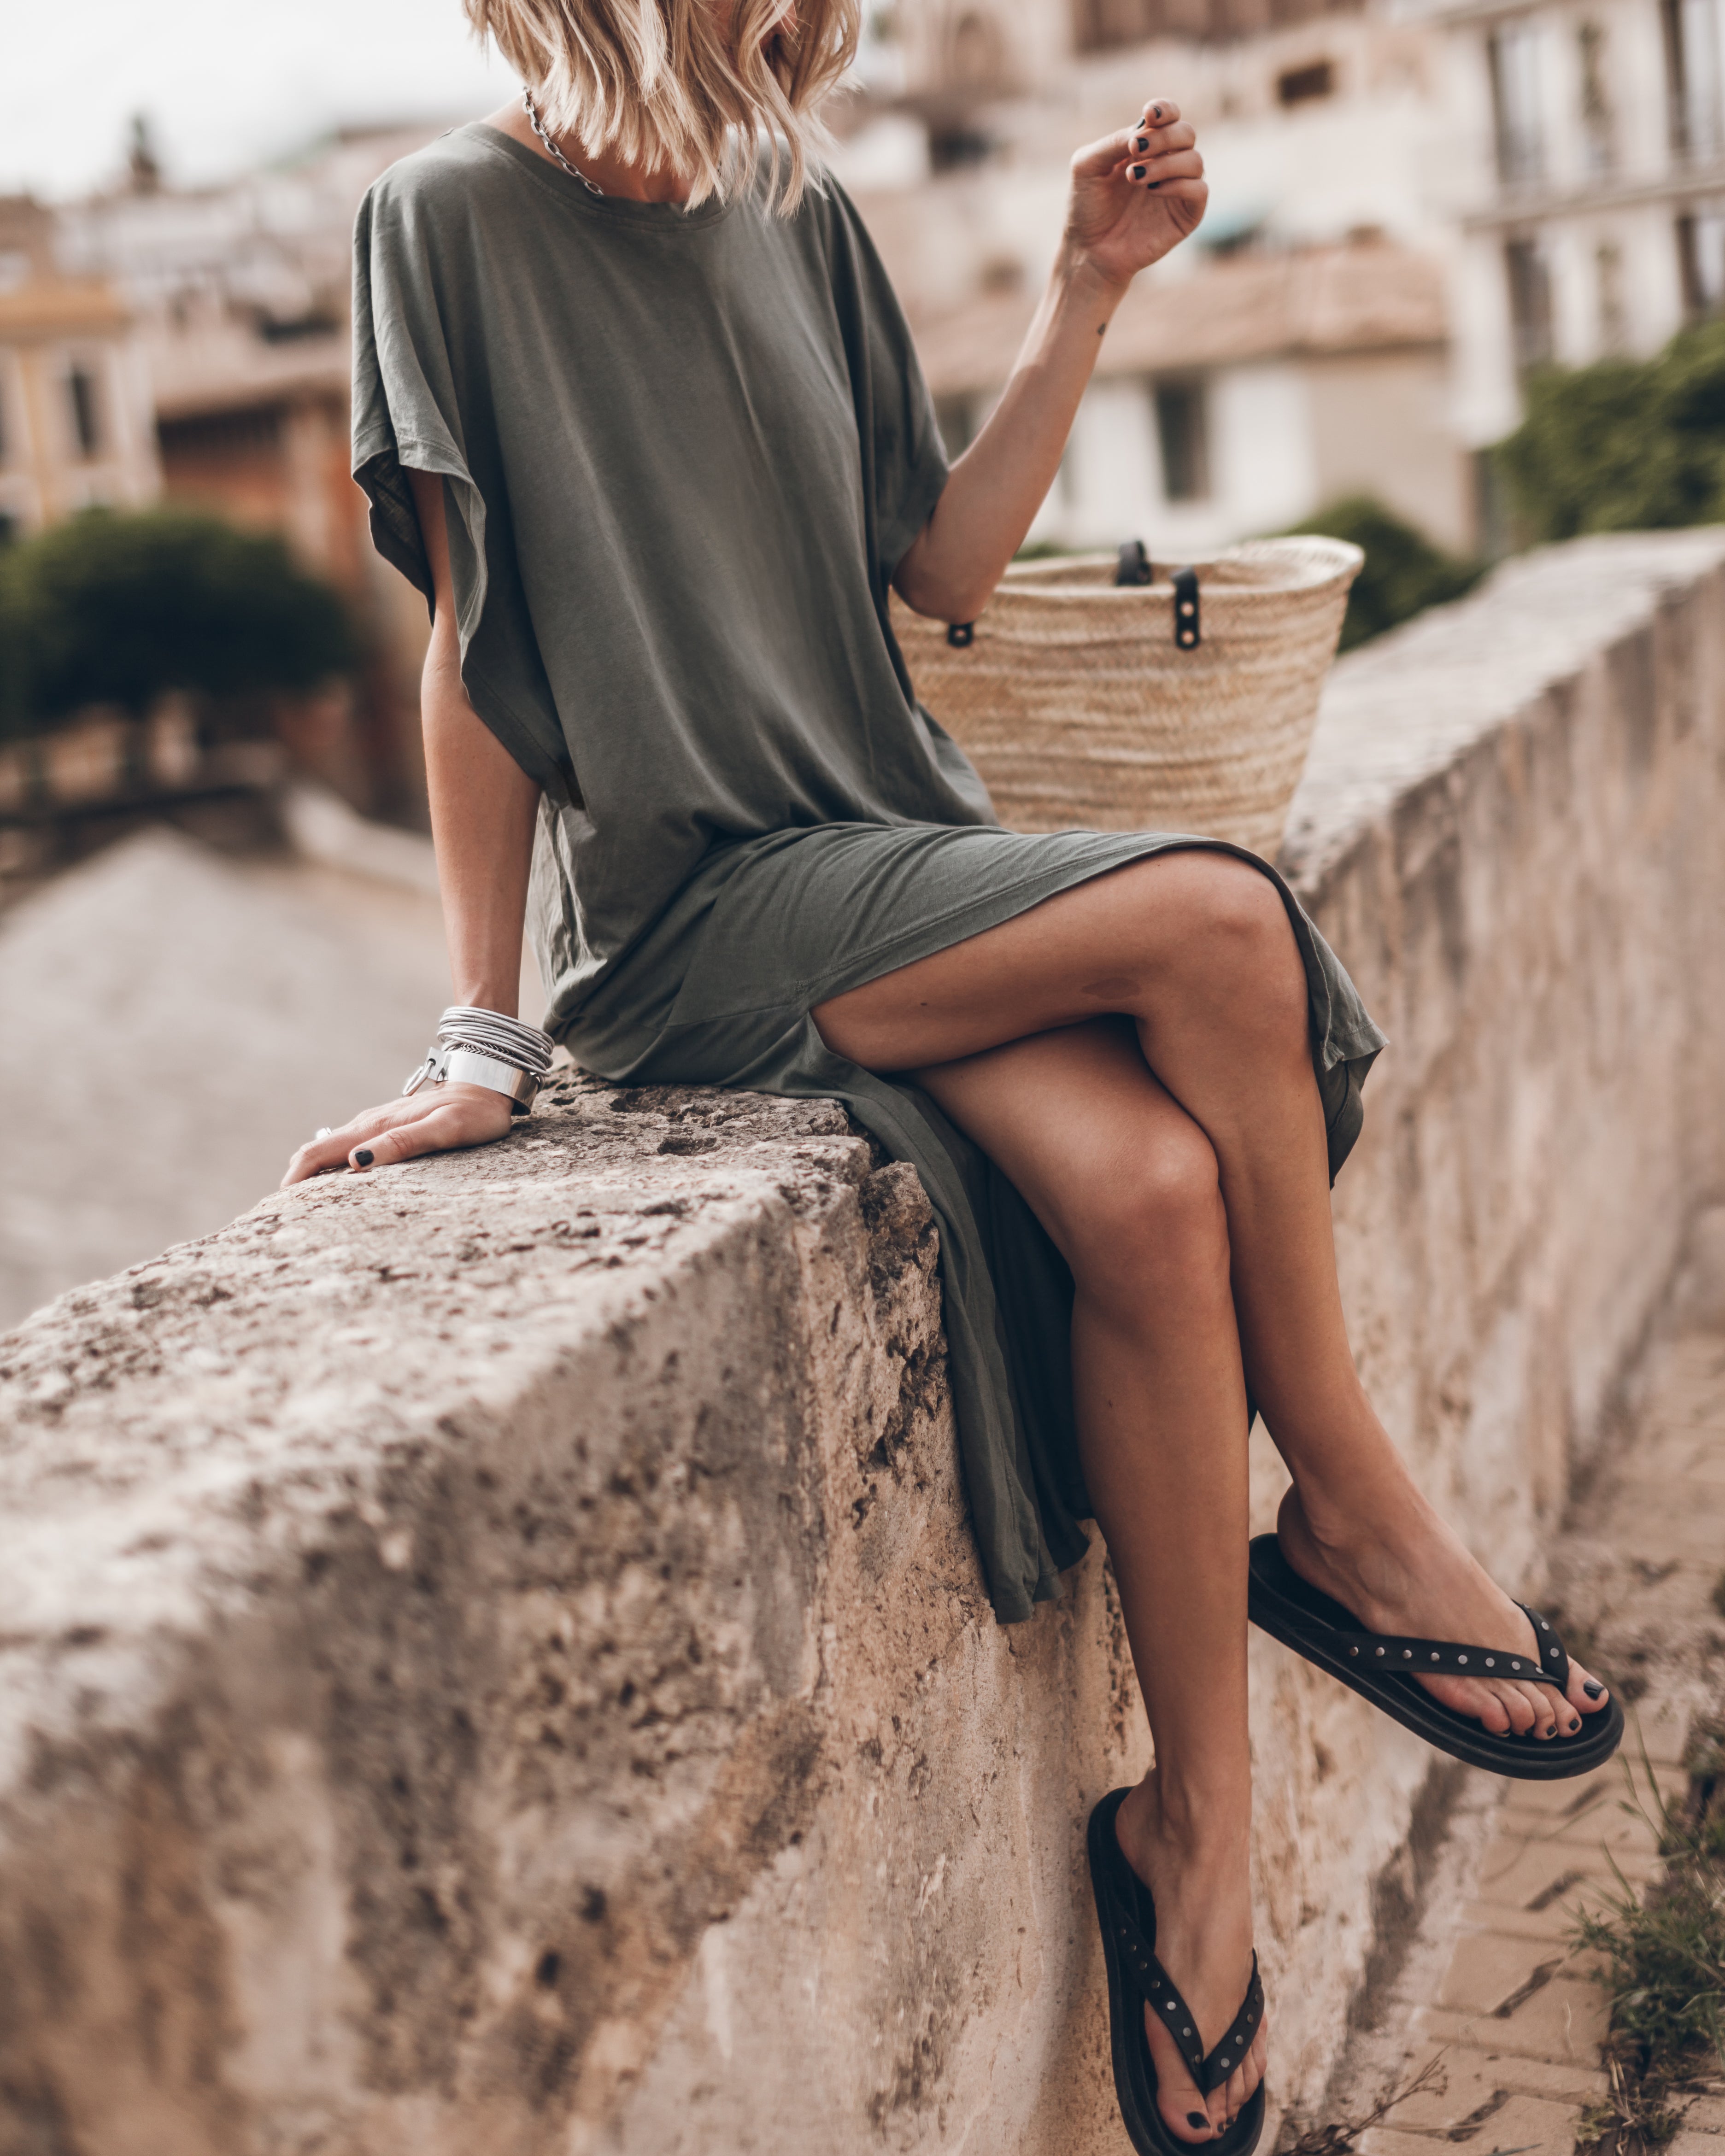 The Olive Long Batwing Dress